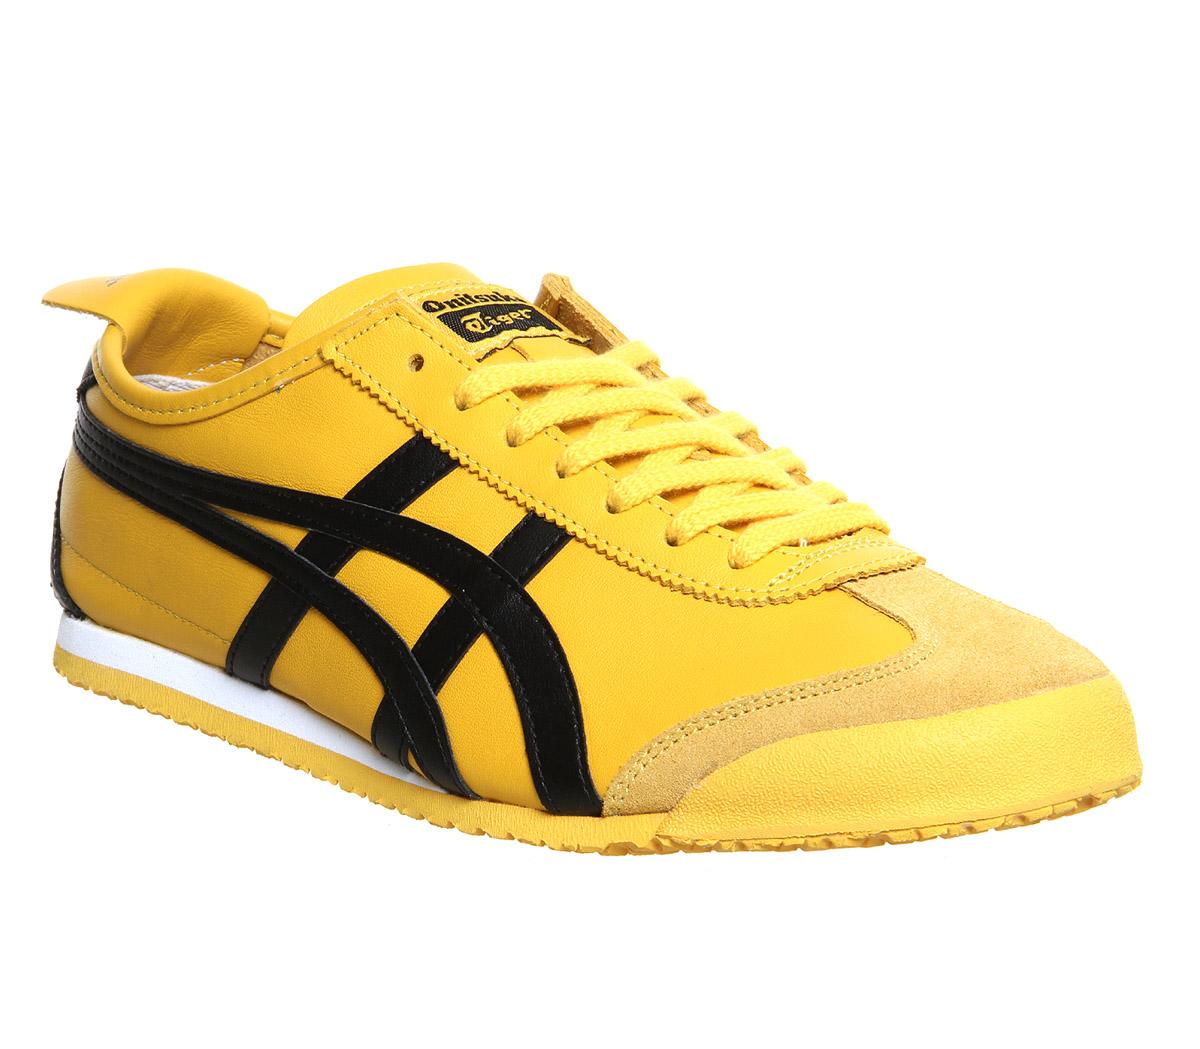 Onitsuka Tiger Mexico 66 Trainers in Yellow - Save 32.65306122448979% ...